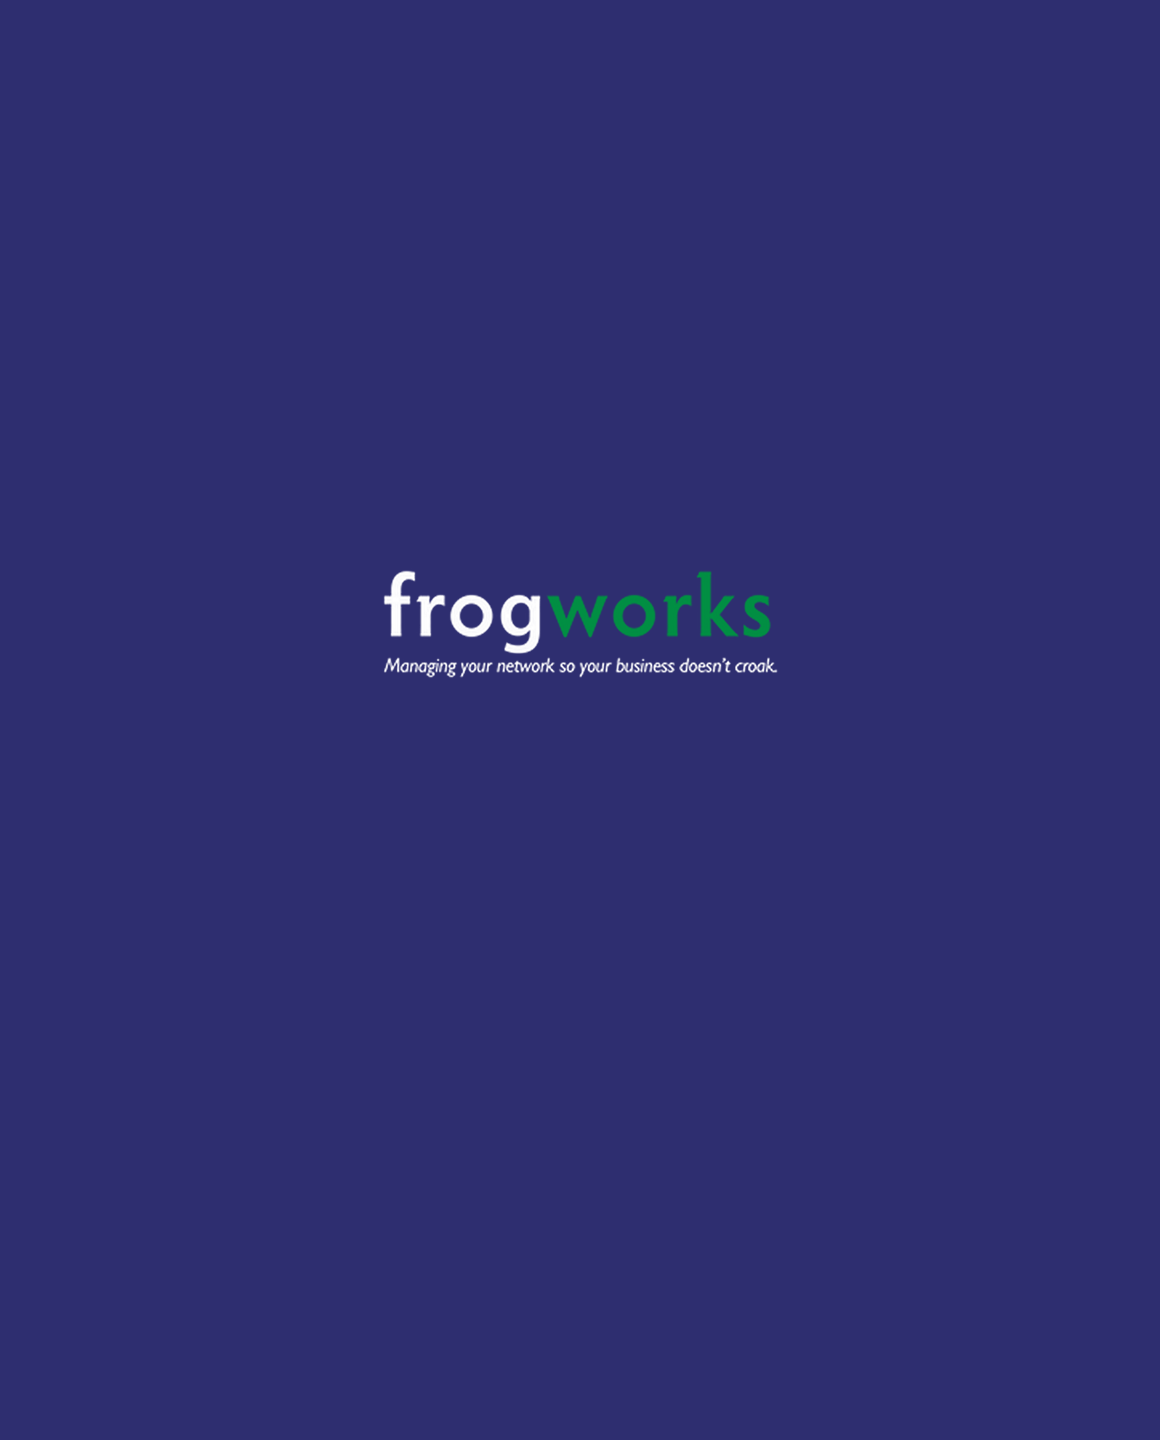 Businesses in Washington DC - Frogworks is Here to Provide Managed IT Services